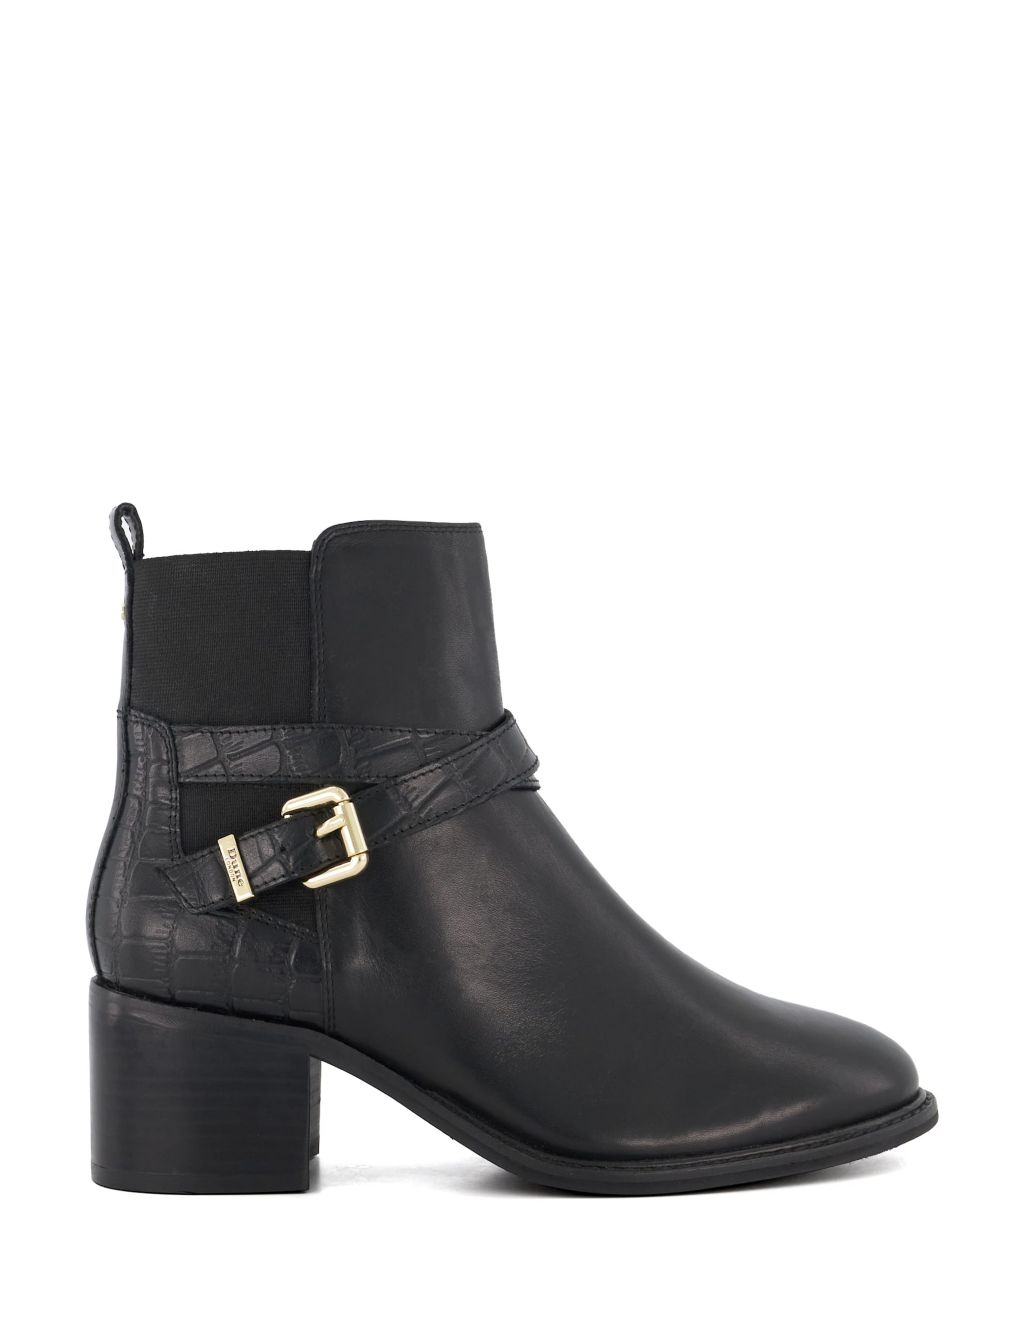 Leather Buckle Block Heel Ankle Boots image 1